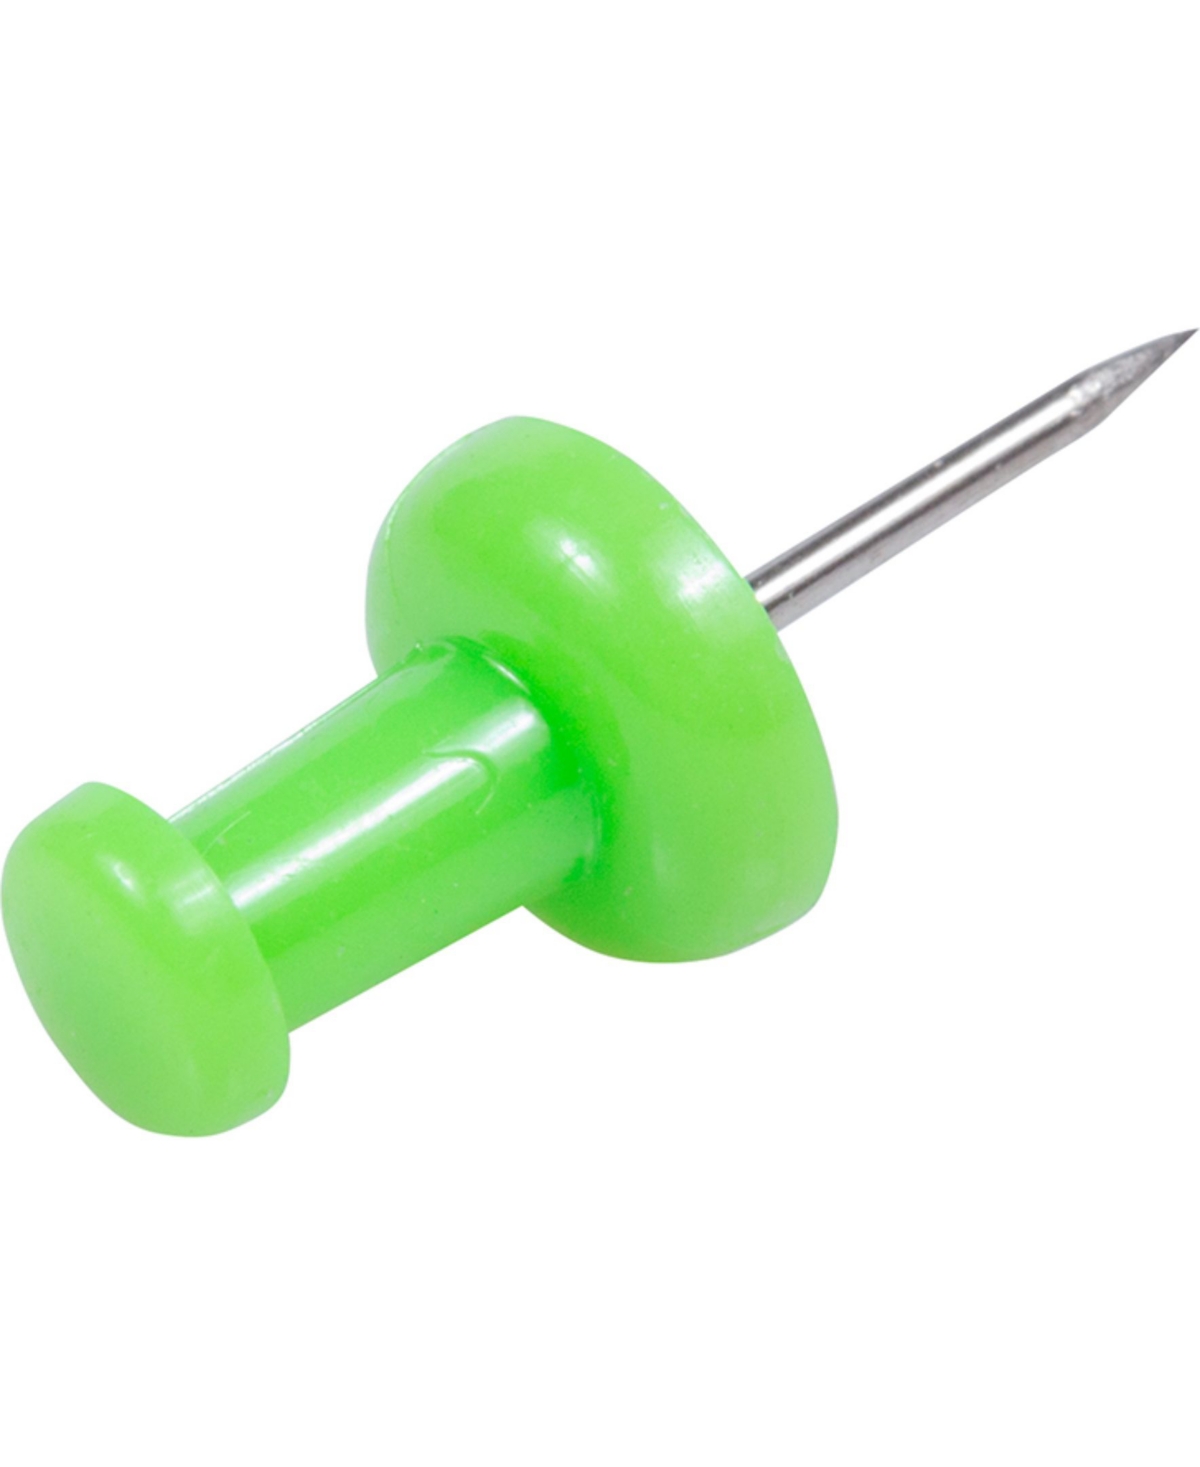 Shop Jam Paper Colorful Push Pins In Lime Green